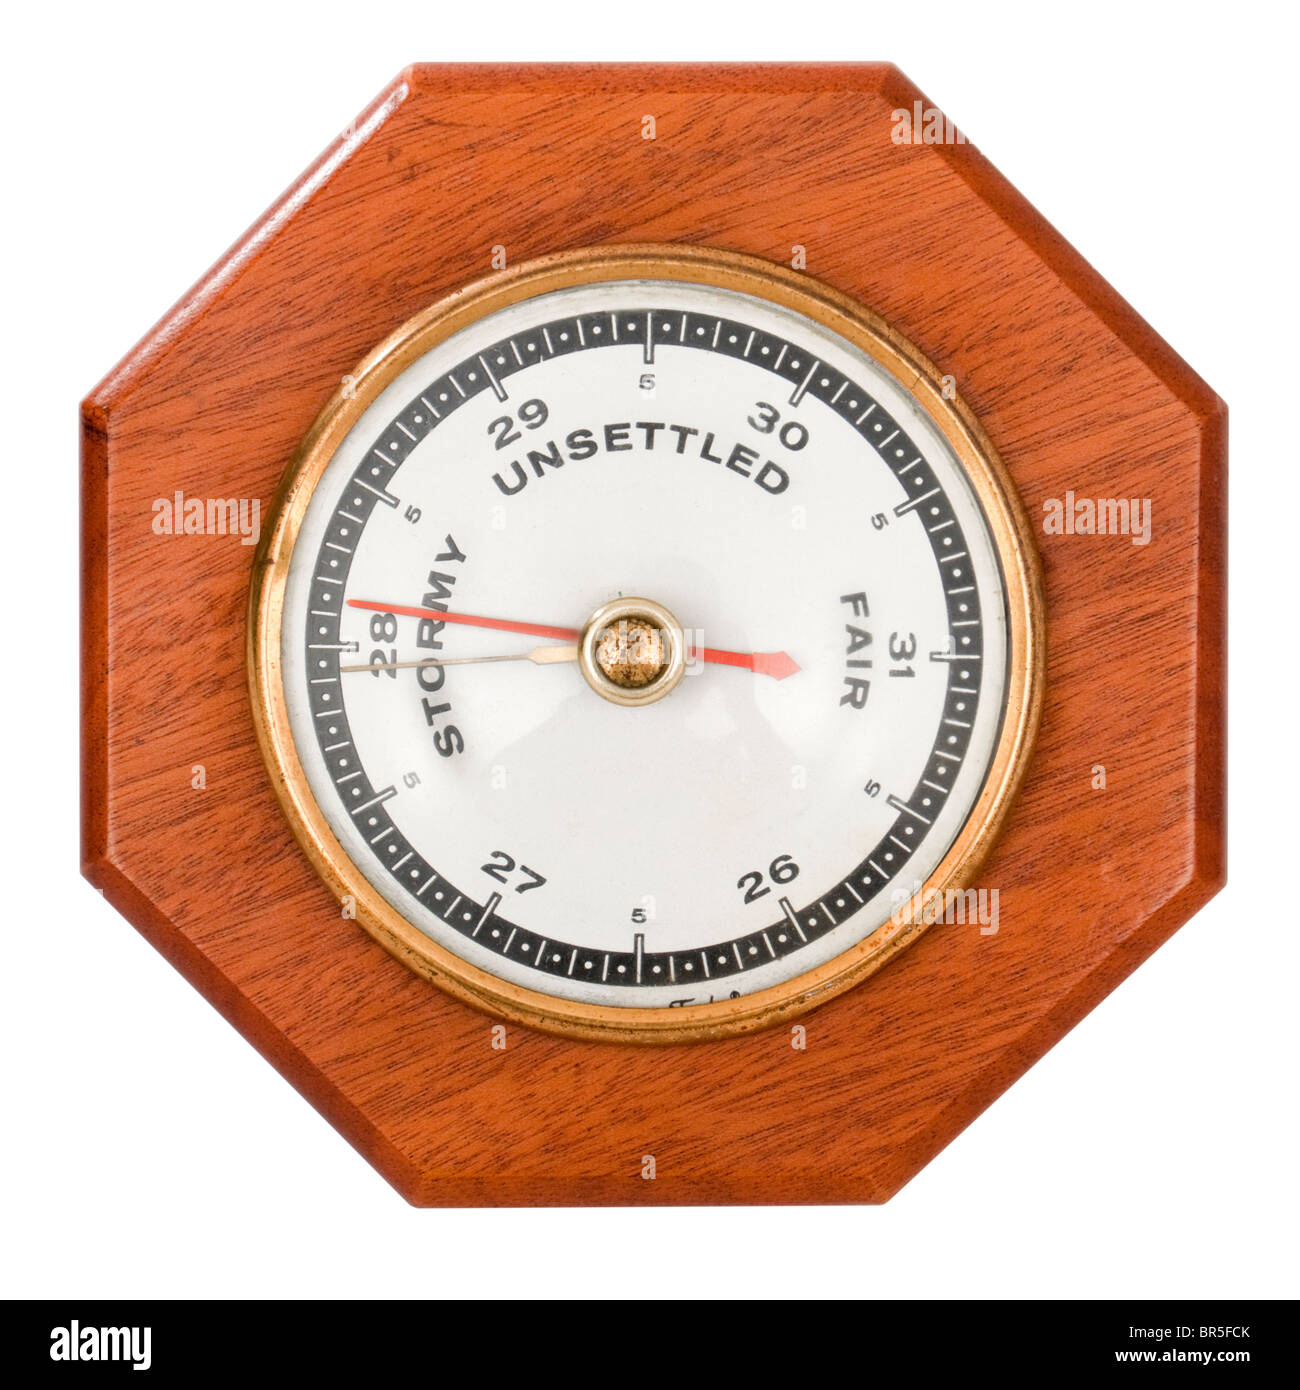 Vintage wooden barometer indicating stormy weather Stock Photo